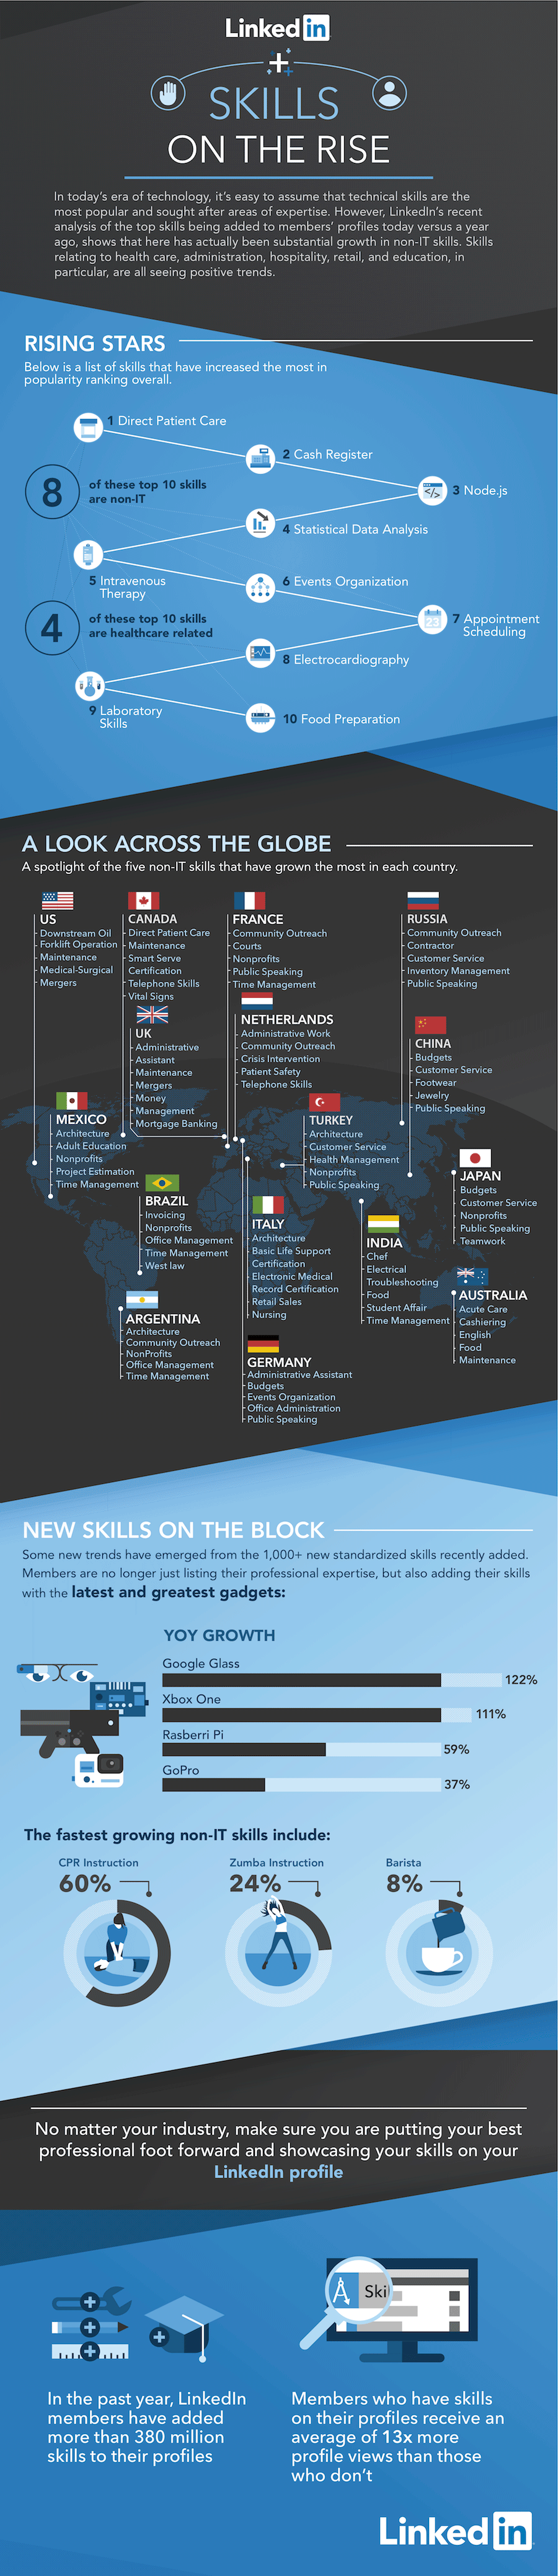 linkedin reveals non tech jobs skills that are on the rise